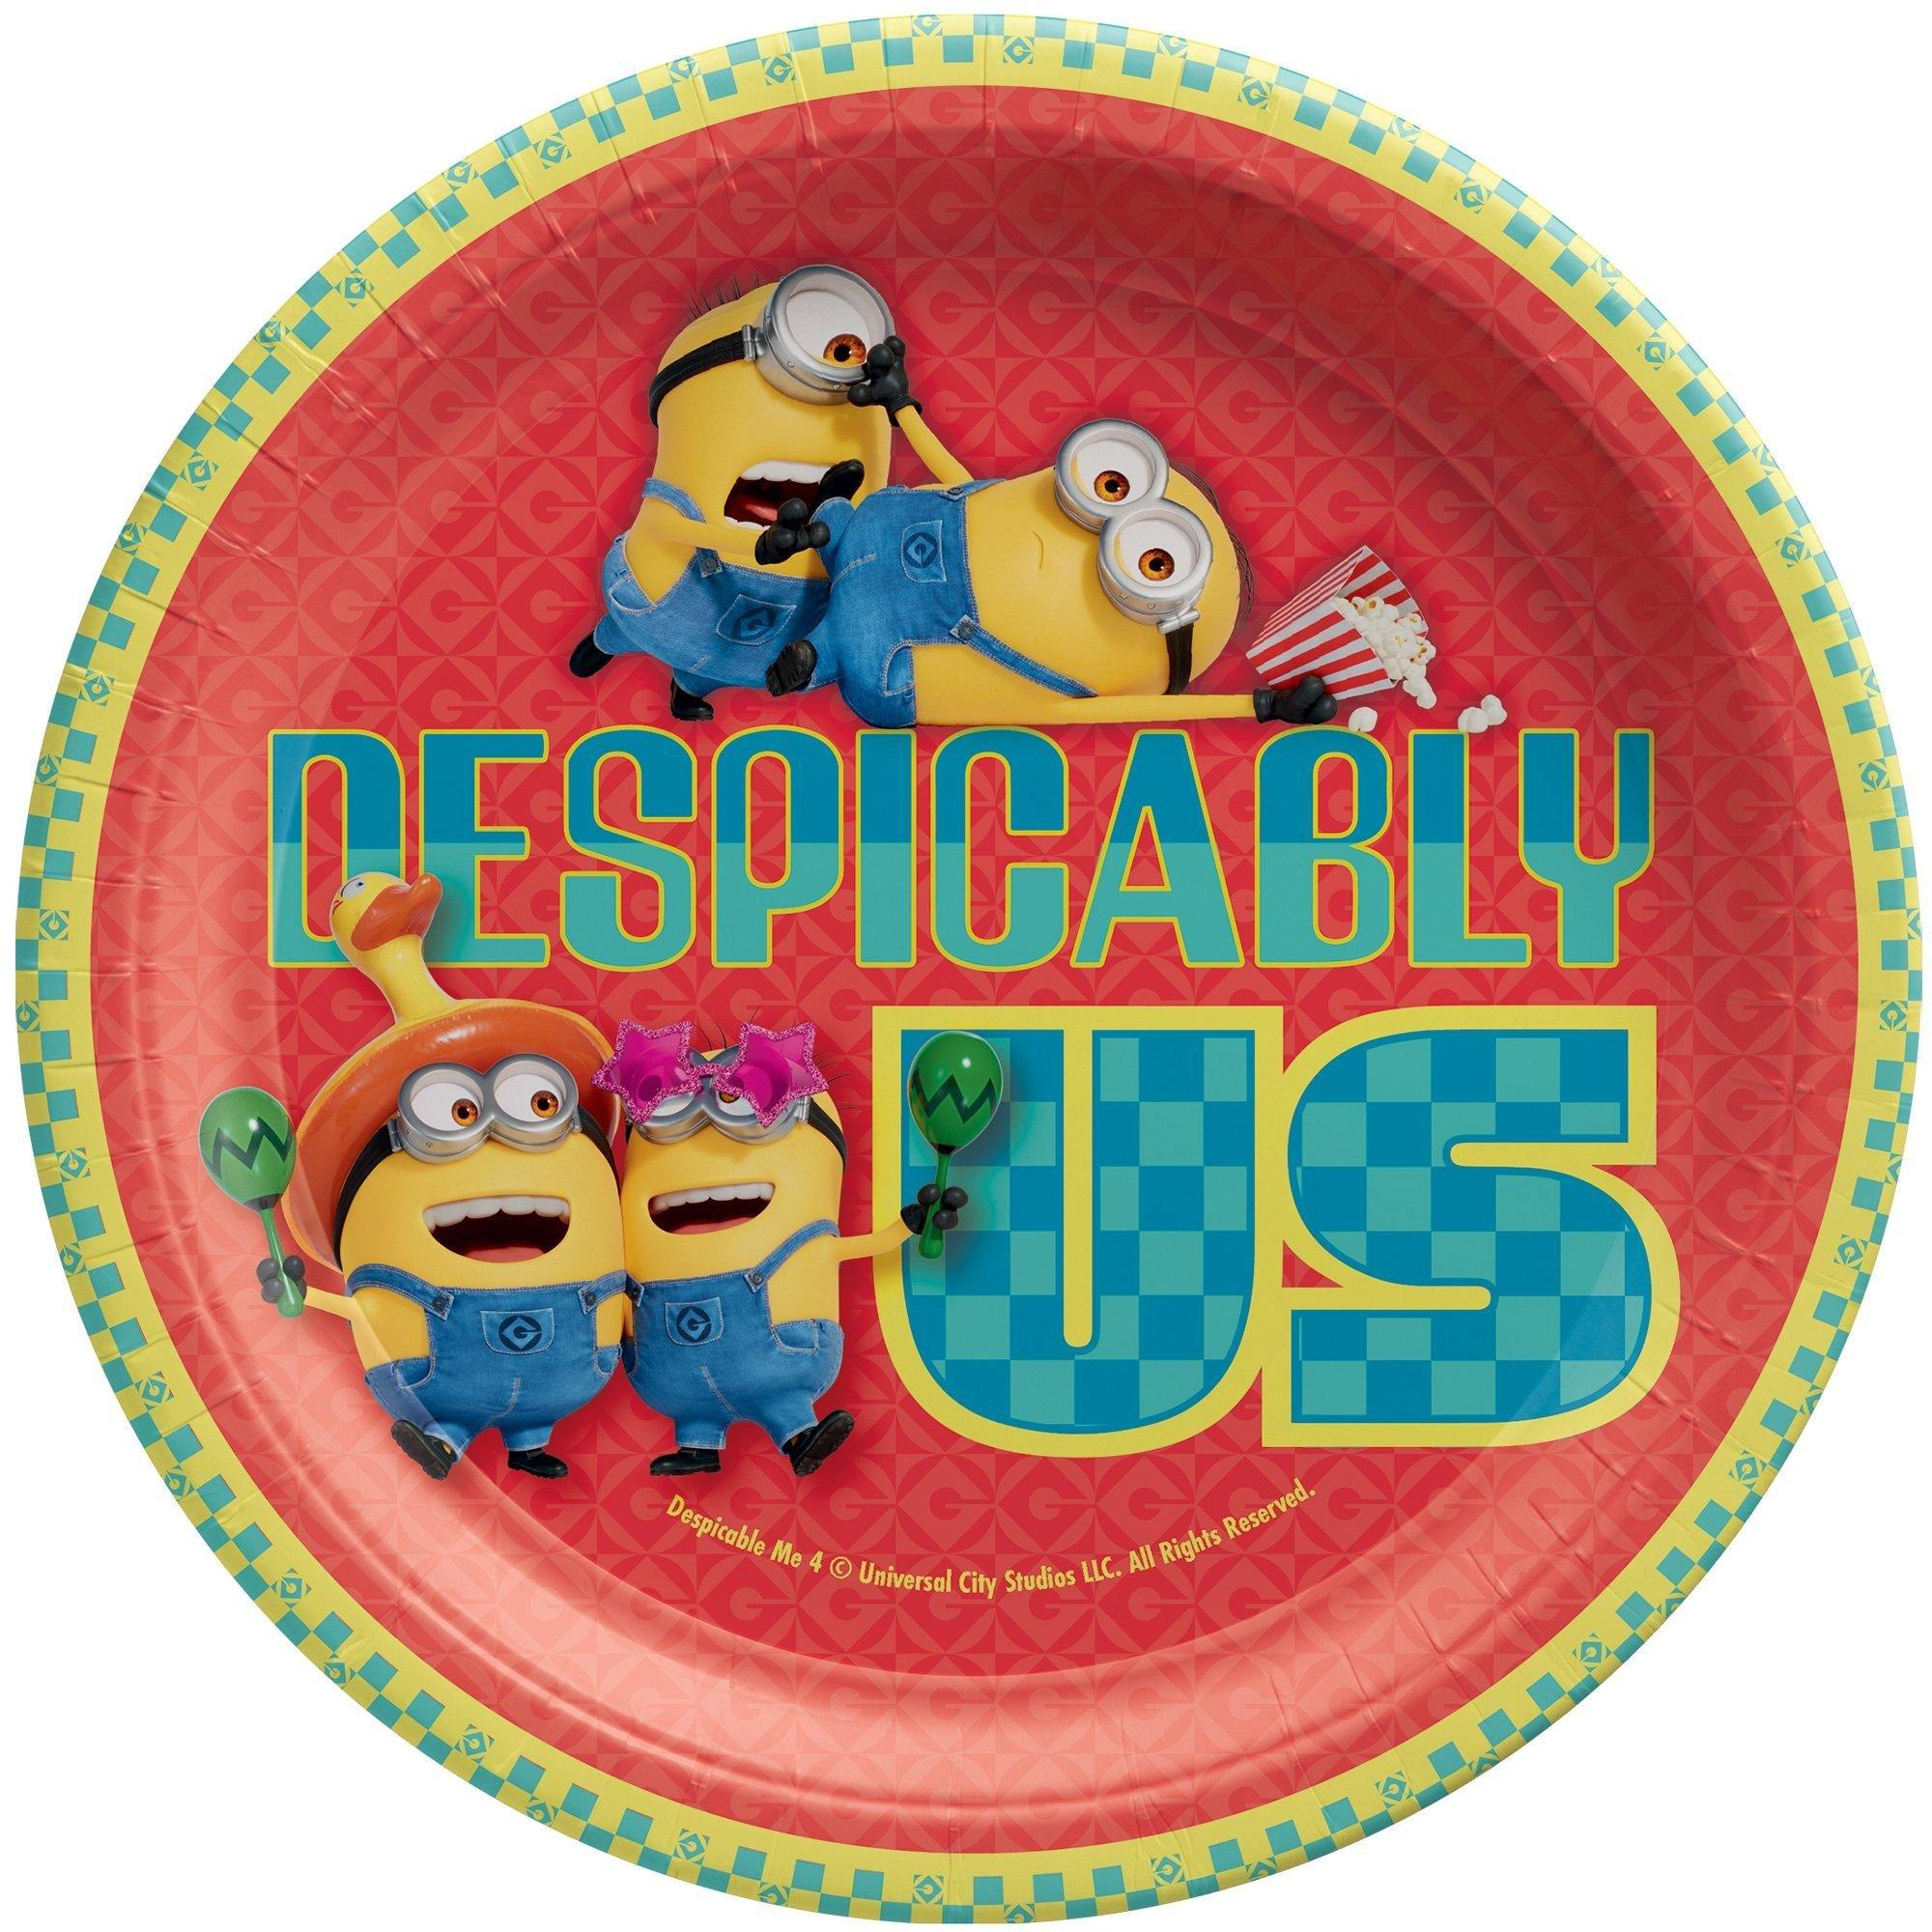 Despicable Me 4 Minions Birthday Party Supplies Pack for 8 Guests - Despicable Me 4 - Kit Includes Plates, Napkins, Cups, Table Cover, Candle, Banner Decoration & Themed Latex Balloons